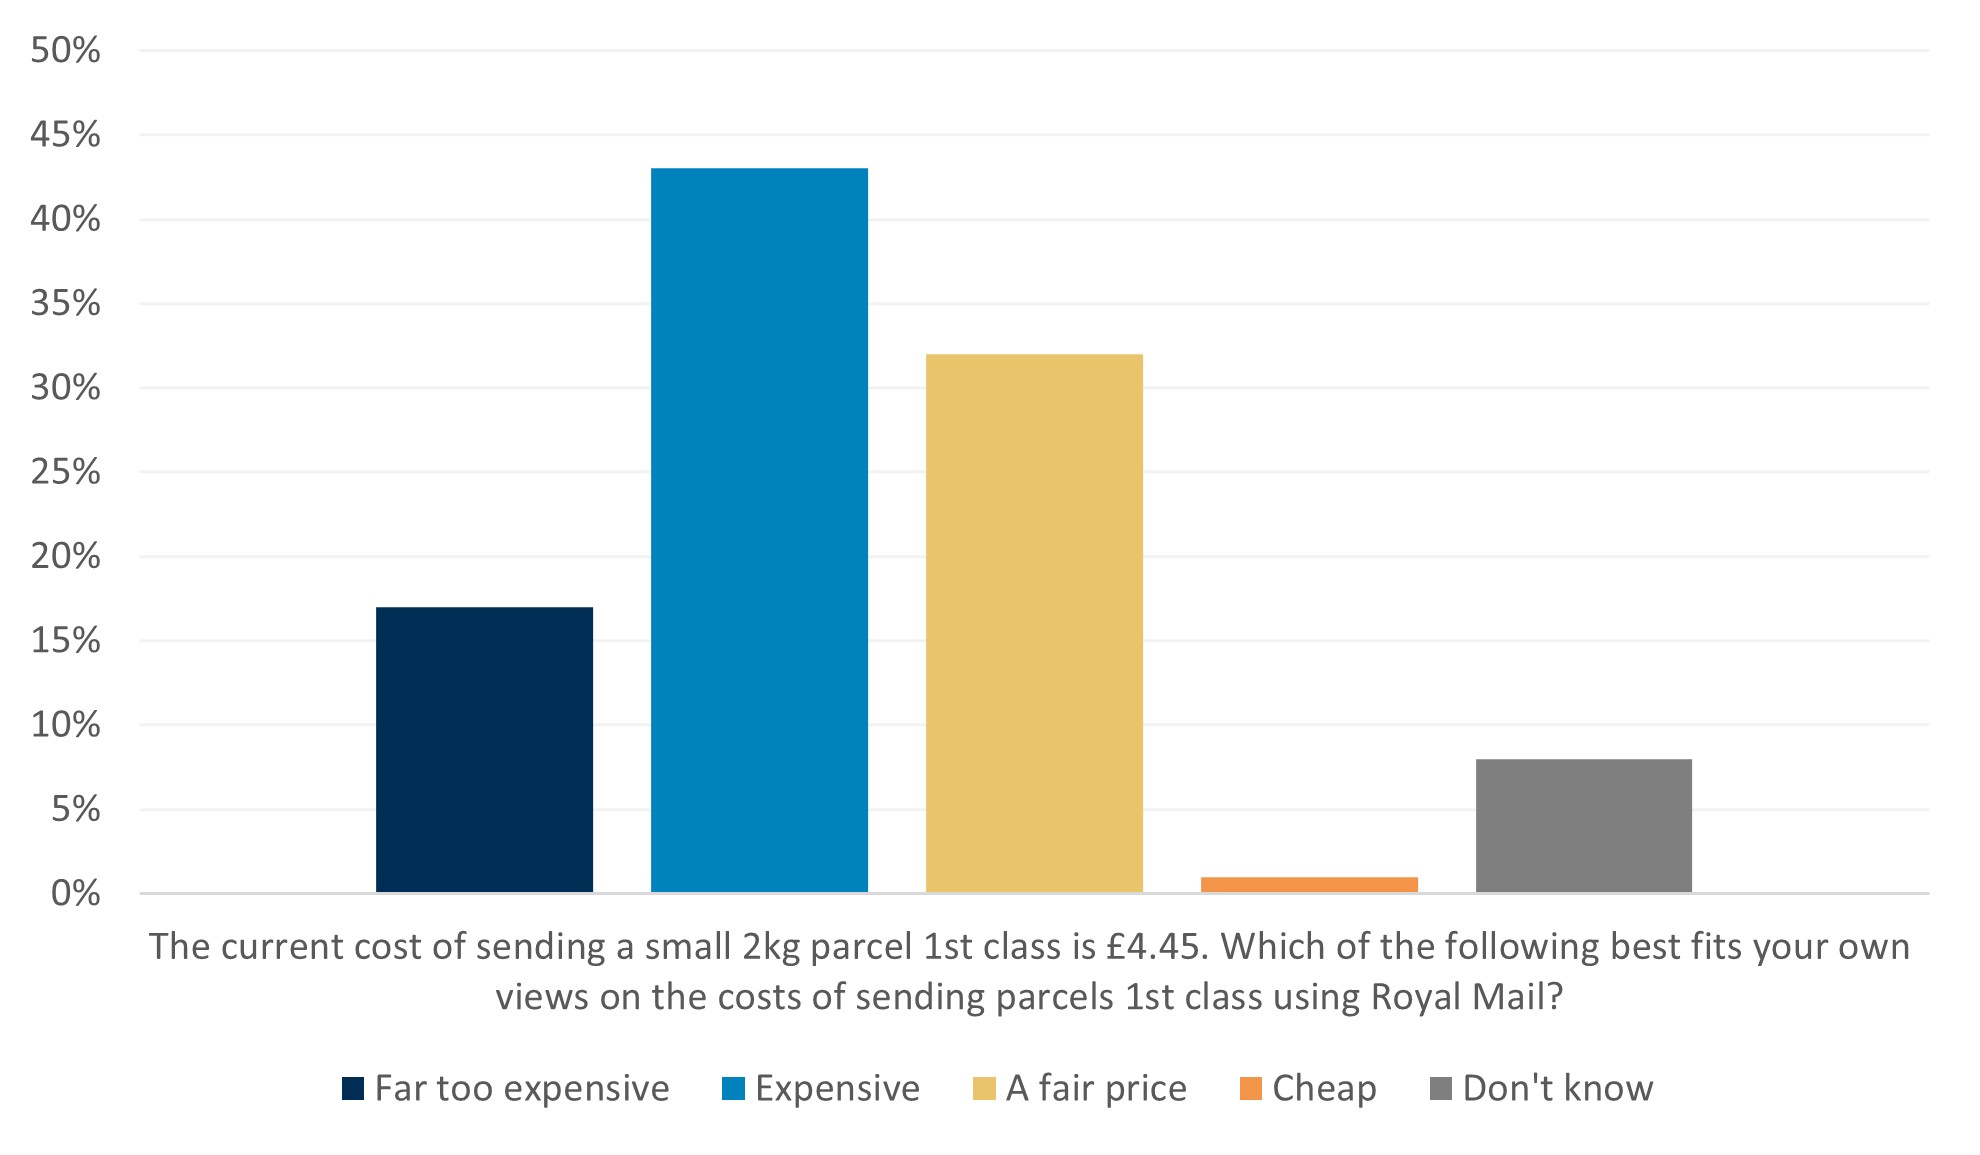 In answer to our survey question "The current cost of sending a small 2kg parcel 1st class is £4.45. Which of the following best fits your own views on the costs of sending parcels 1st class using Royal Mail? 17% said it was far too expensive, 43% said it was expensive, 32% said it was a fair price, 1% said it was cheap, 8% said they don't know.